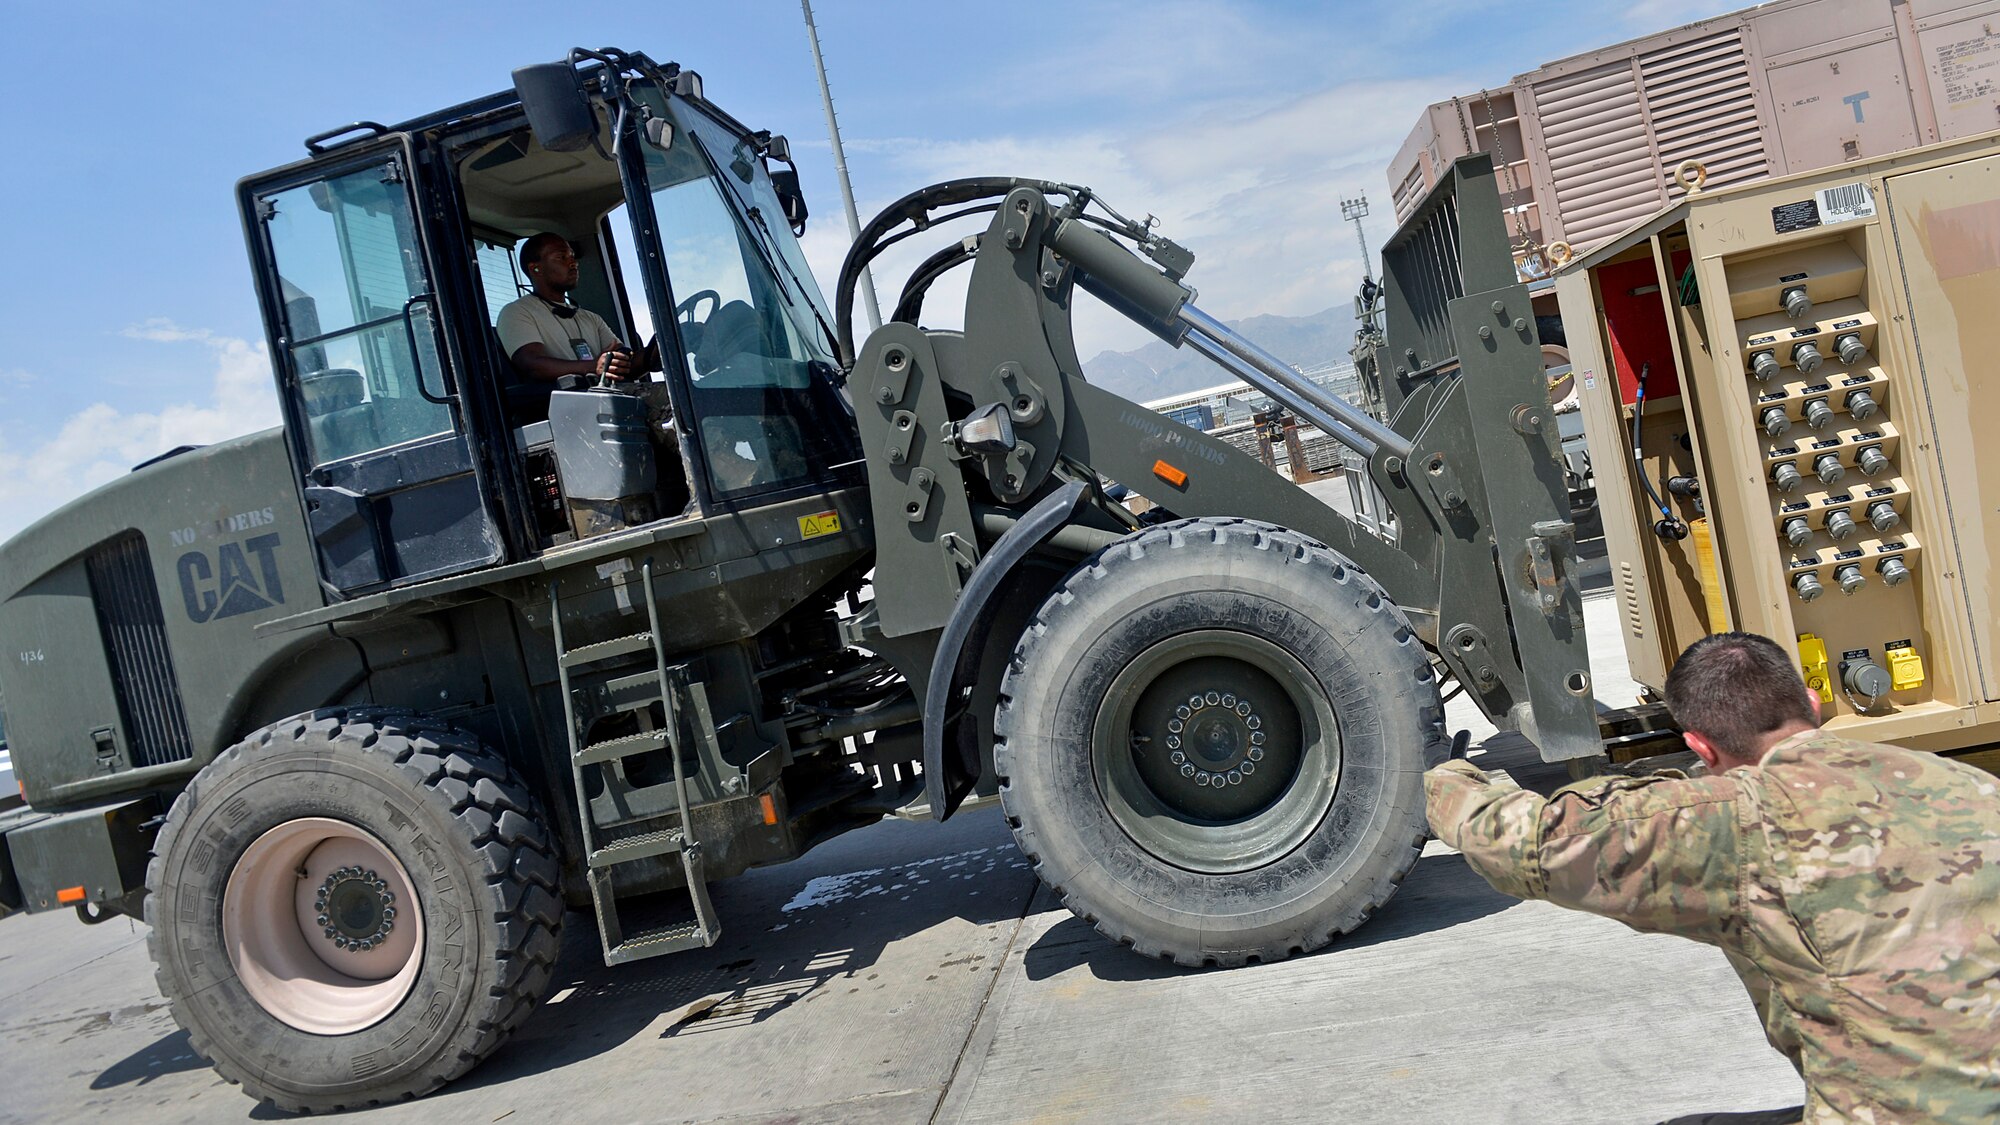 Staff Sgt. Marcin Vande Hei, 455th Expeditionary Logistics Readiness Squadron Central Command Materiel Recovery Element non-commissioned officer-in-charge guides a forklift May 2, 2014 at Bagram Airfield, Afghanistan.  Vande Hei, is part of a CMRE team that is responsible for identifying, storing and redeploying assets to the U.S. or disposing of items located throughout the region. The CMRE team has helped recover more than 60 pieces of equipment worth about $1.66 million within the last eight months. Vande Hei is a native of Washington, D.C. and is deployed from Langley Air Force Base, Va. (U.S. Air Force by Staff Sgt. Evelyn Chavez/Released)